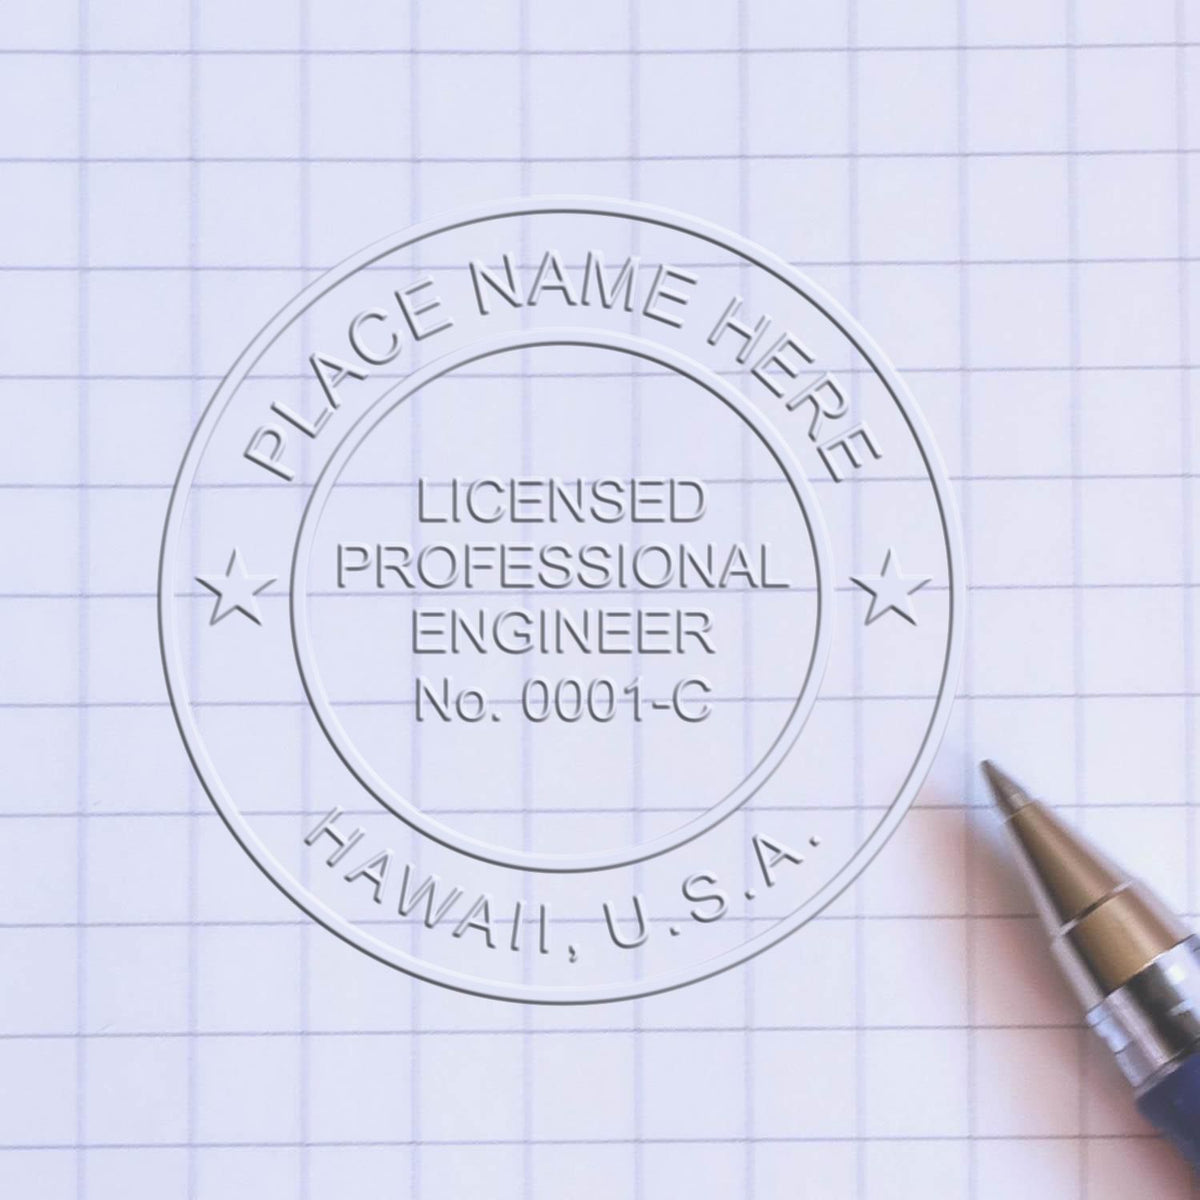 The Heavy Duty Cast Iron Hawaii Engineer Seal Embosser stamp impression comes to life with a crisp, detailed photo on paper - showcasing true professional quality.